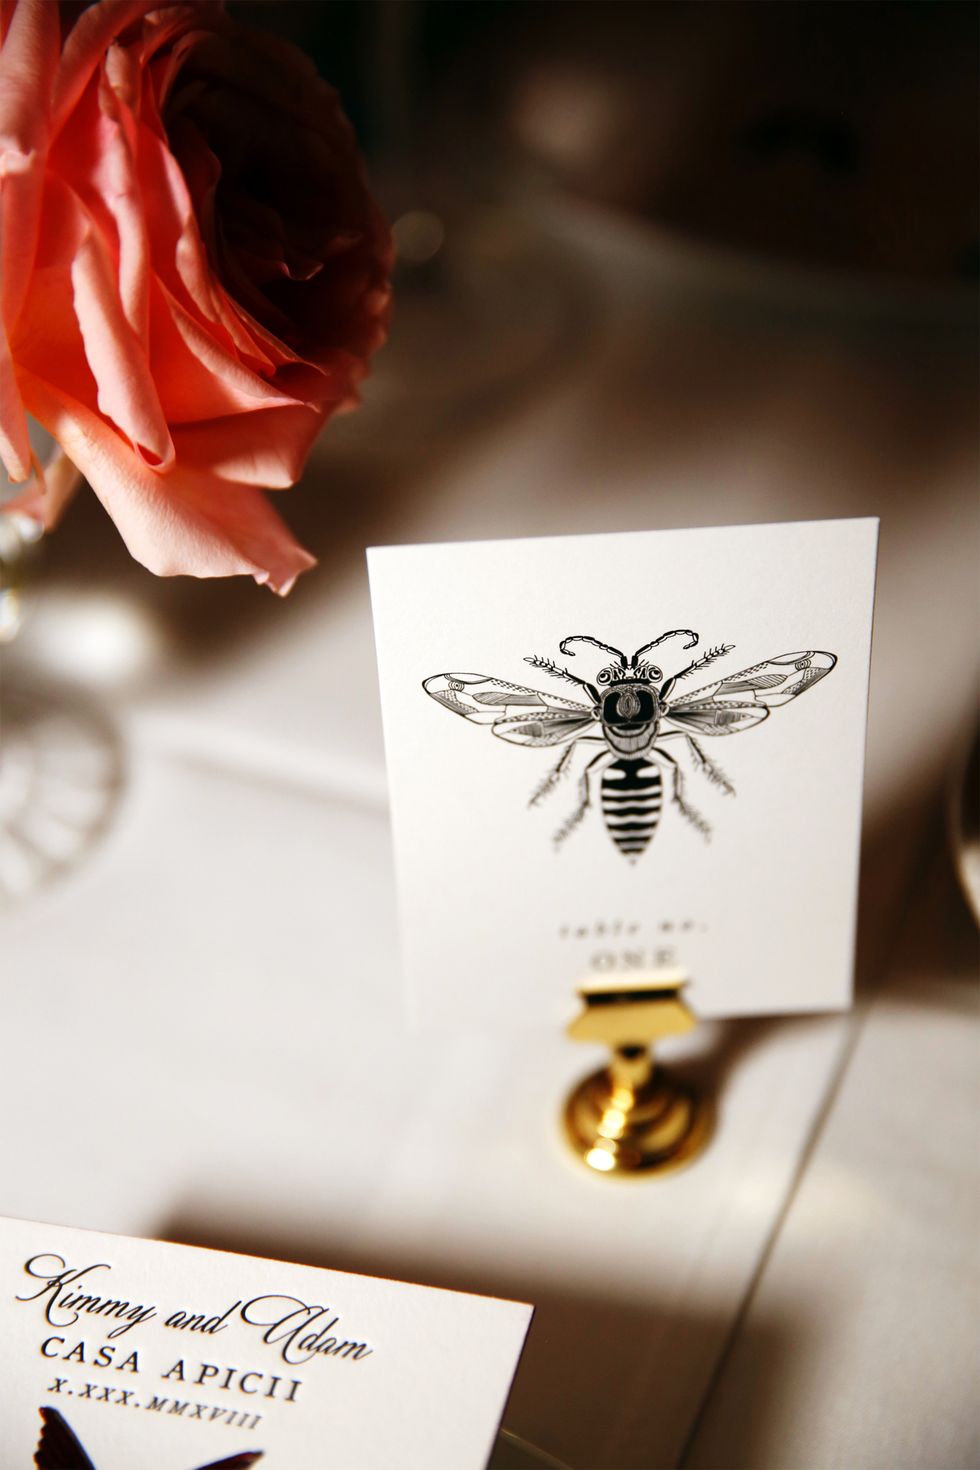 Honeybee, Text, Membrane-winged insect, Place card, Design, Material property, Font, Bee, Pest, Insect, 